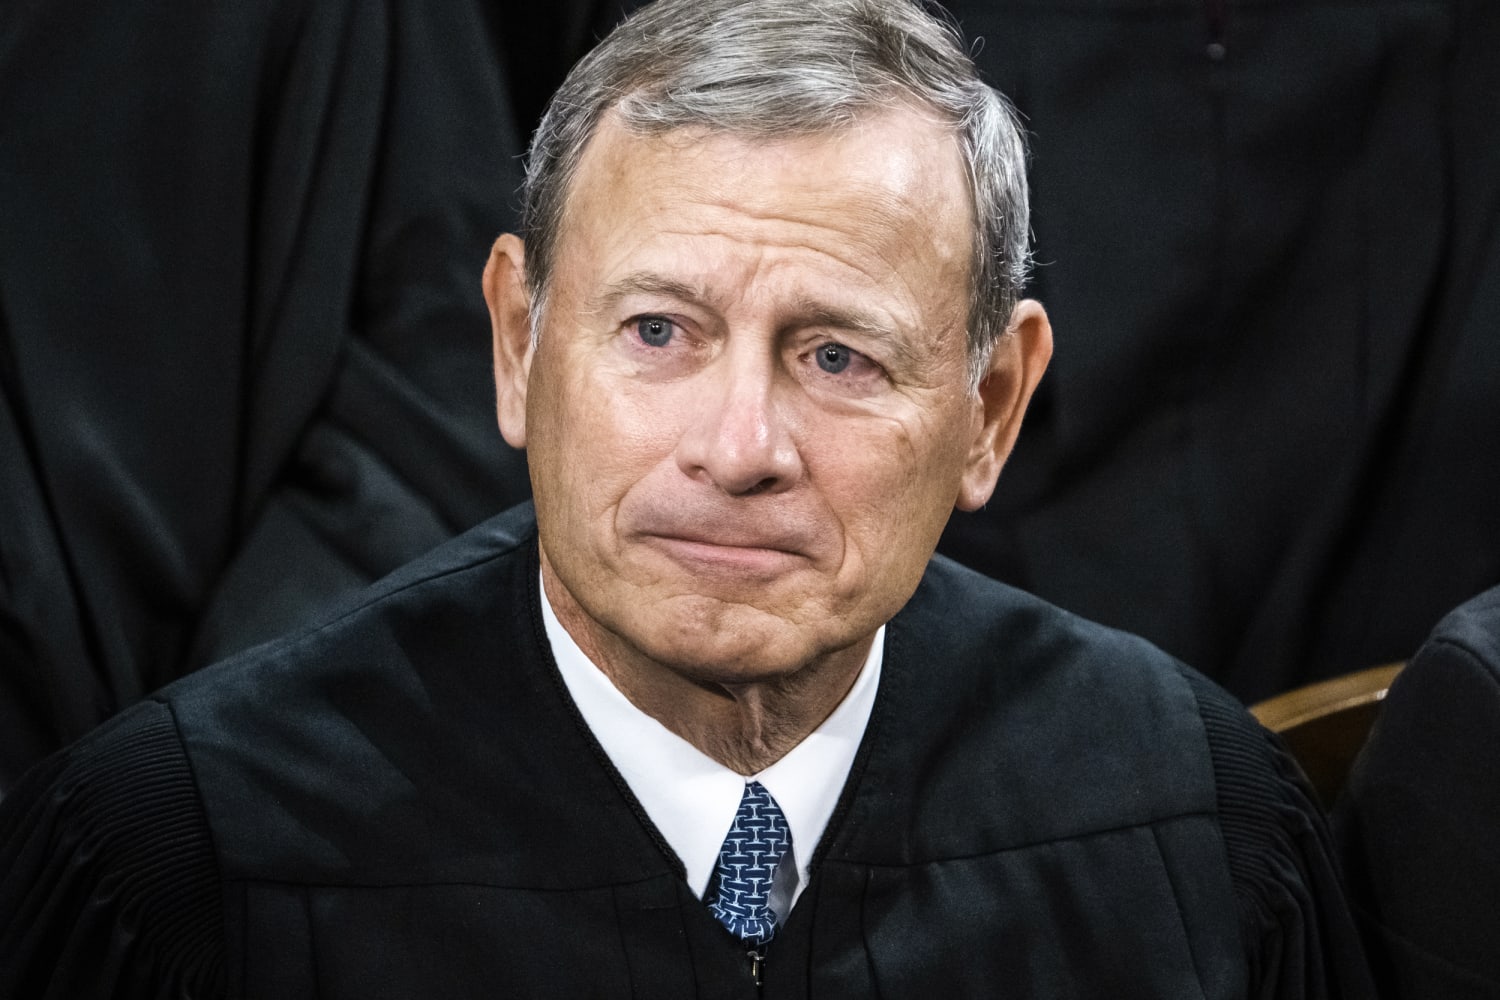 John Roberts should have been at the Supreme Court ethics hearing